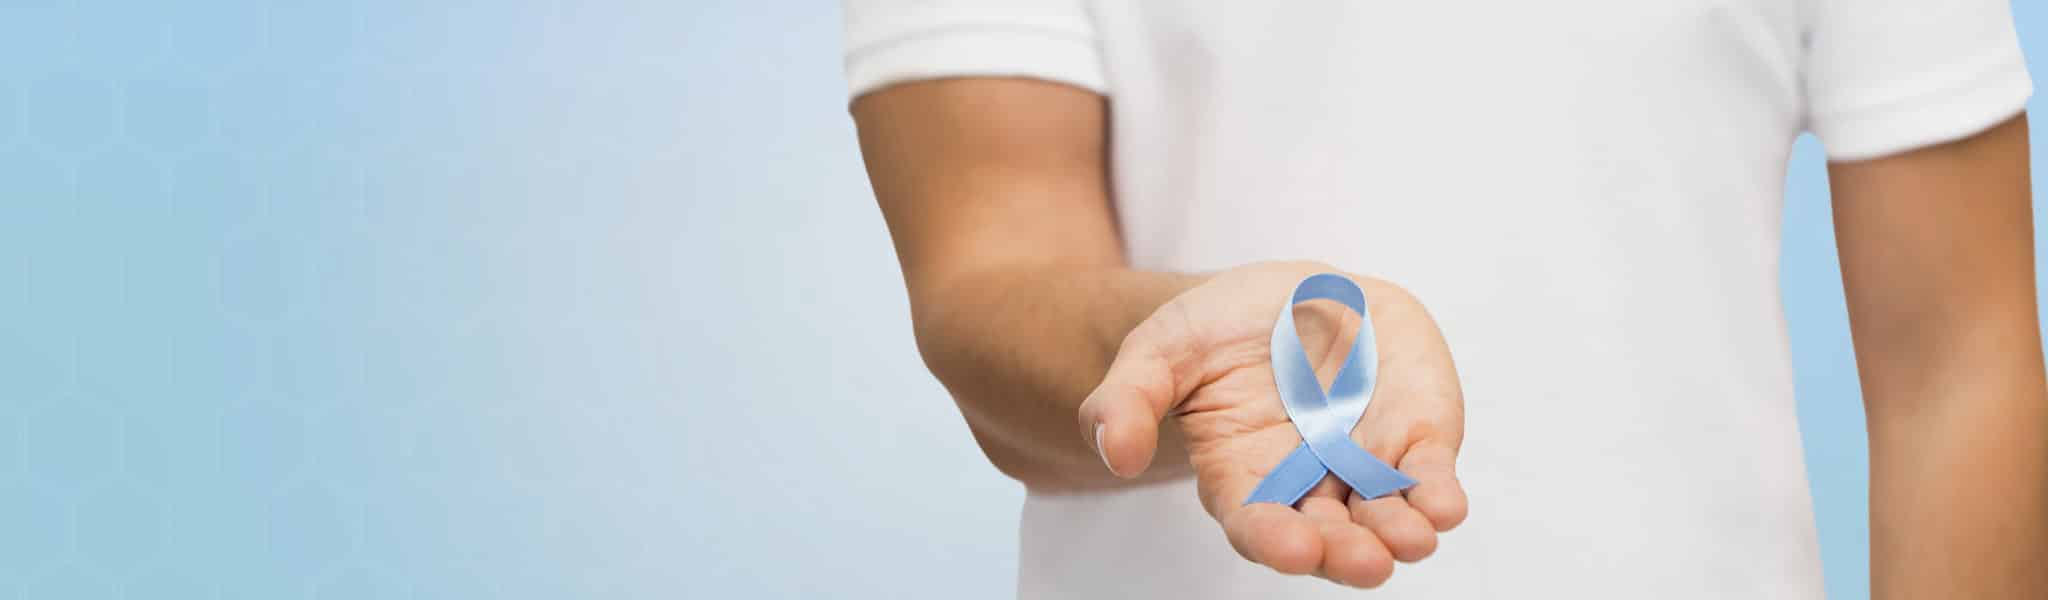 hand with blue prostate cancer awareness ribbon